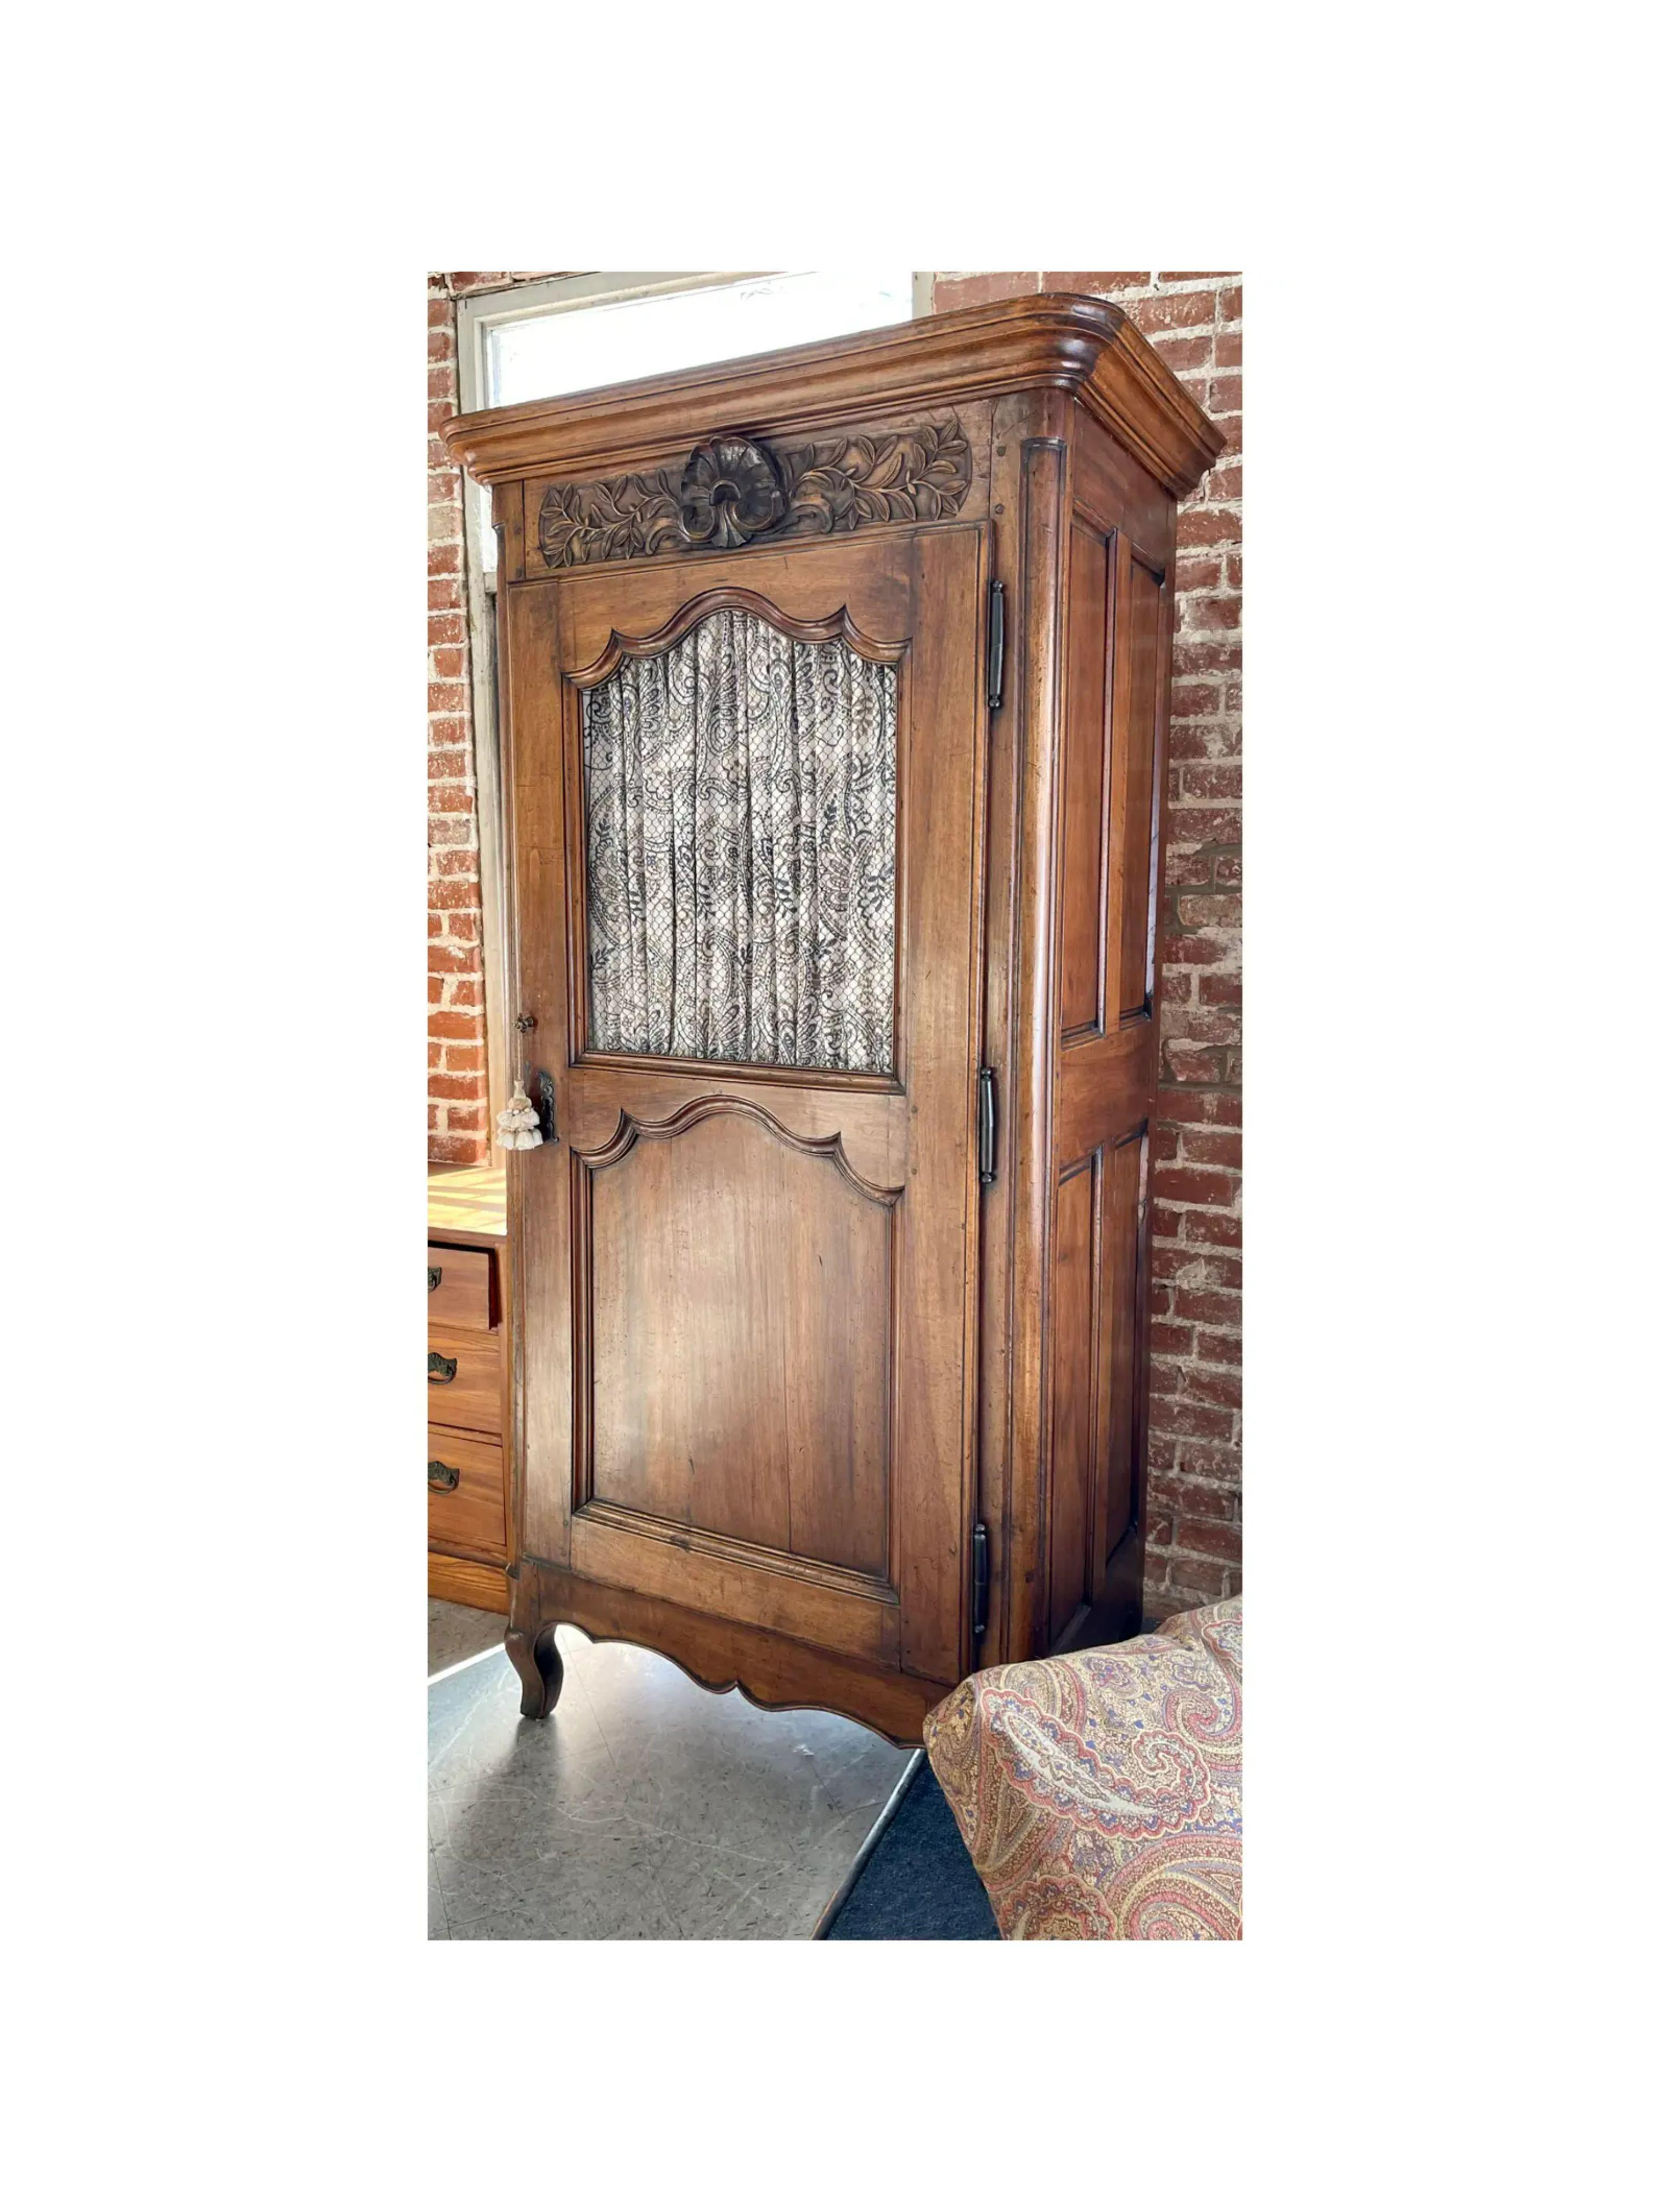 Antique 18th C French Country Fruitwood Bonnetierre ( French for hat closet ) cupboard cabinet

Additional information:
Materials: Fruitwood
Color: Brown
Period: 18th Century
Styles: French Country, French Provincial
Item Type: Vintage,